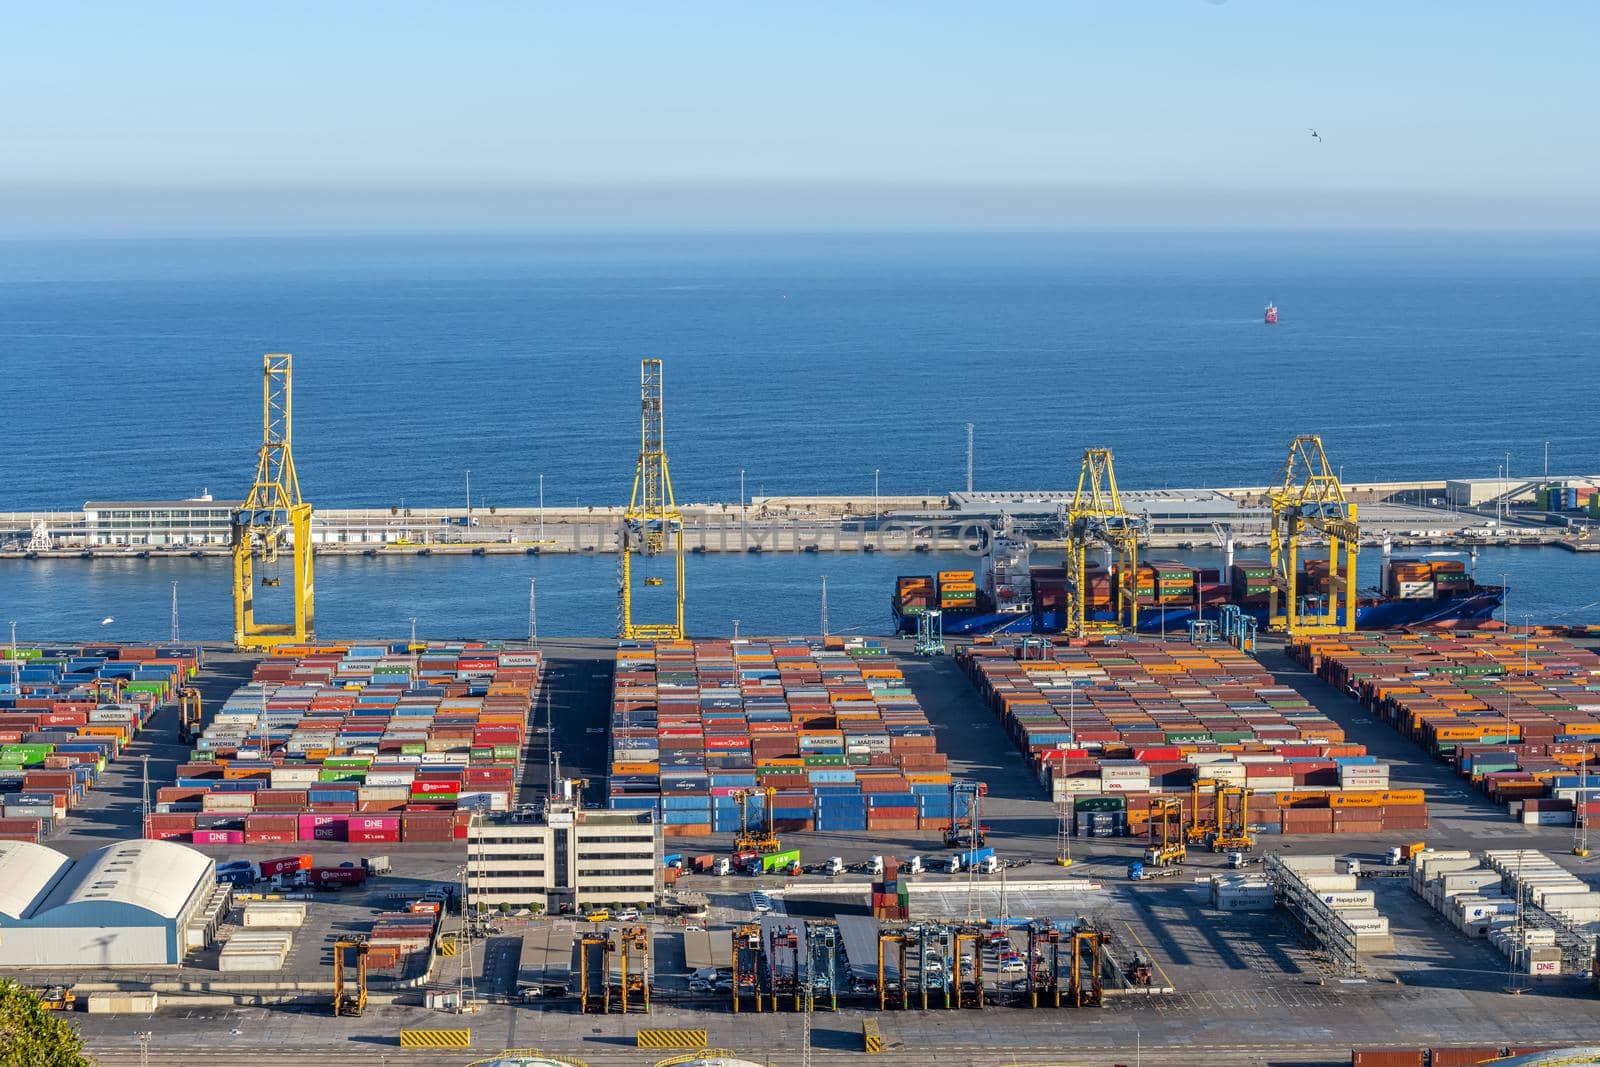 The commercial harbour of Barcelona with containers and cranes by elxeneize